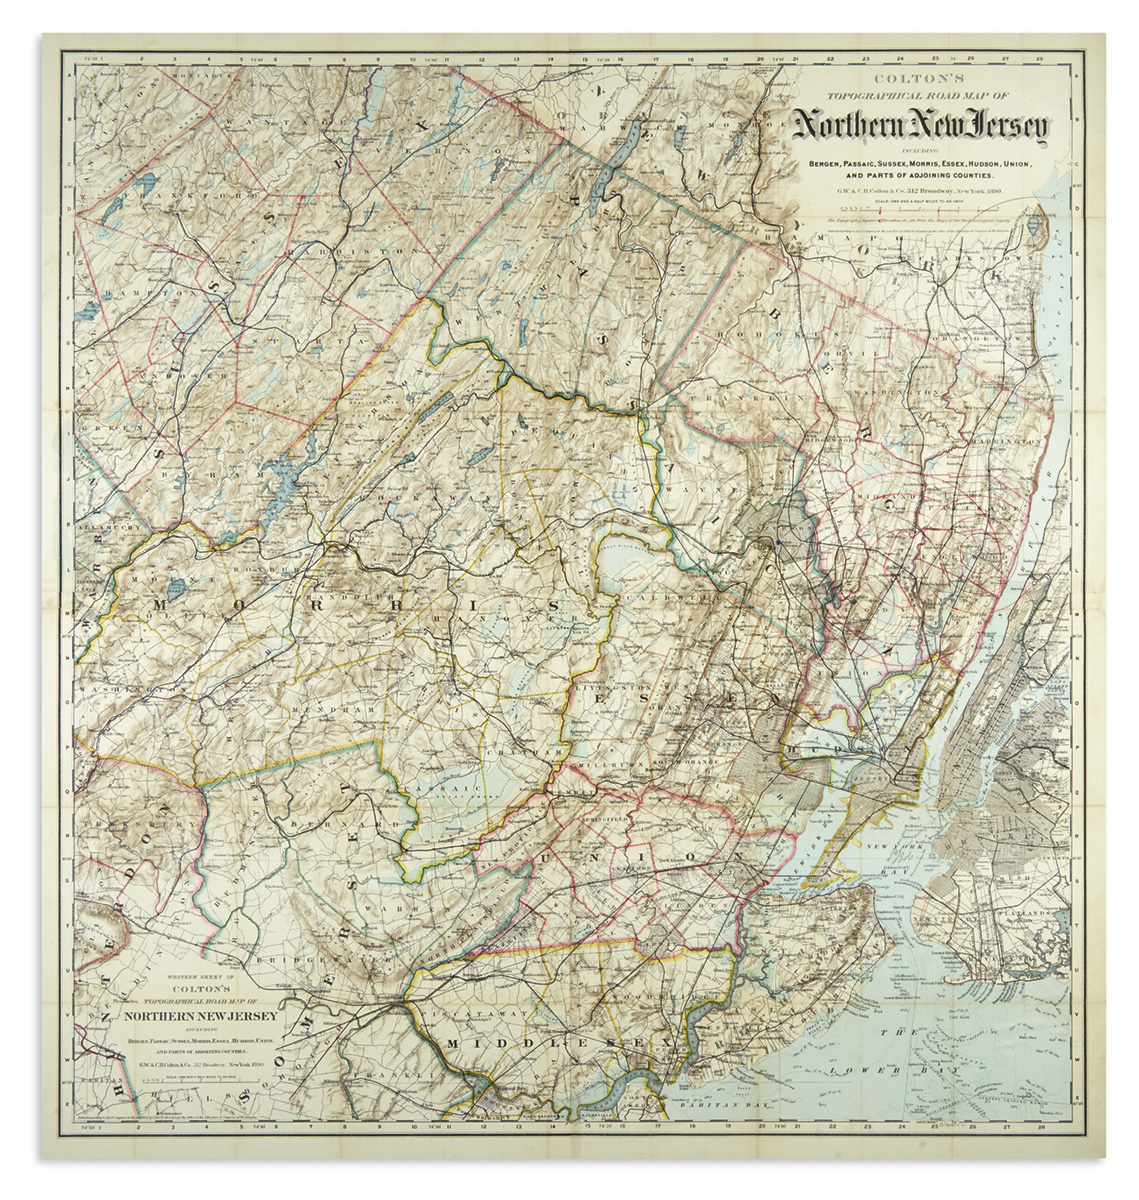 COLTON, G.W. & C.B. Coltons Topographical Road Map of Northern New Jersey.